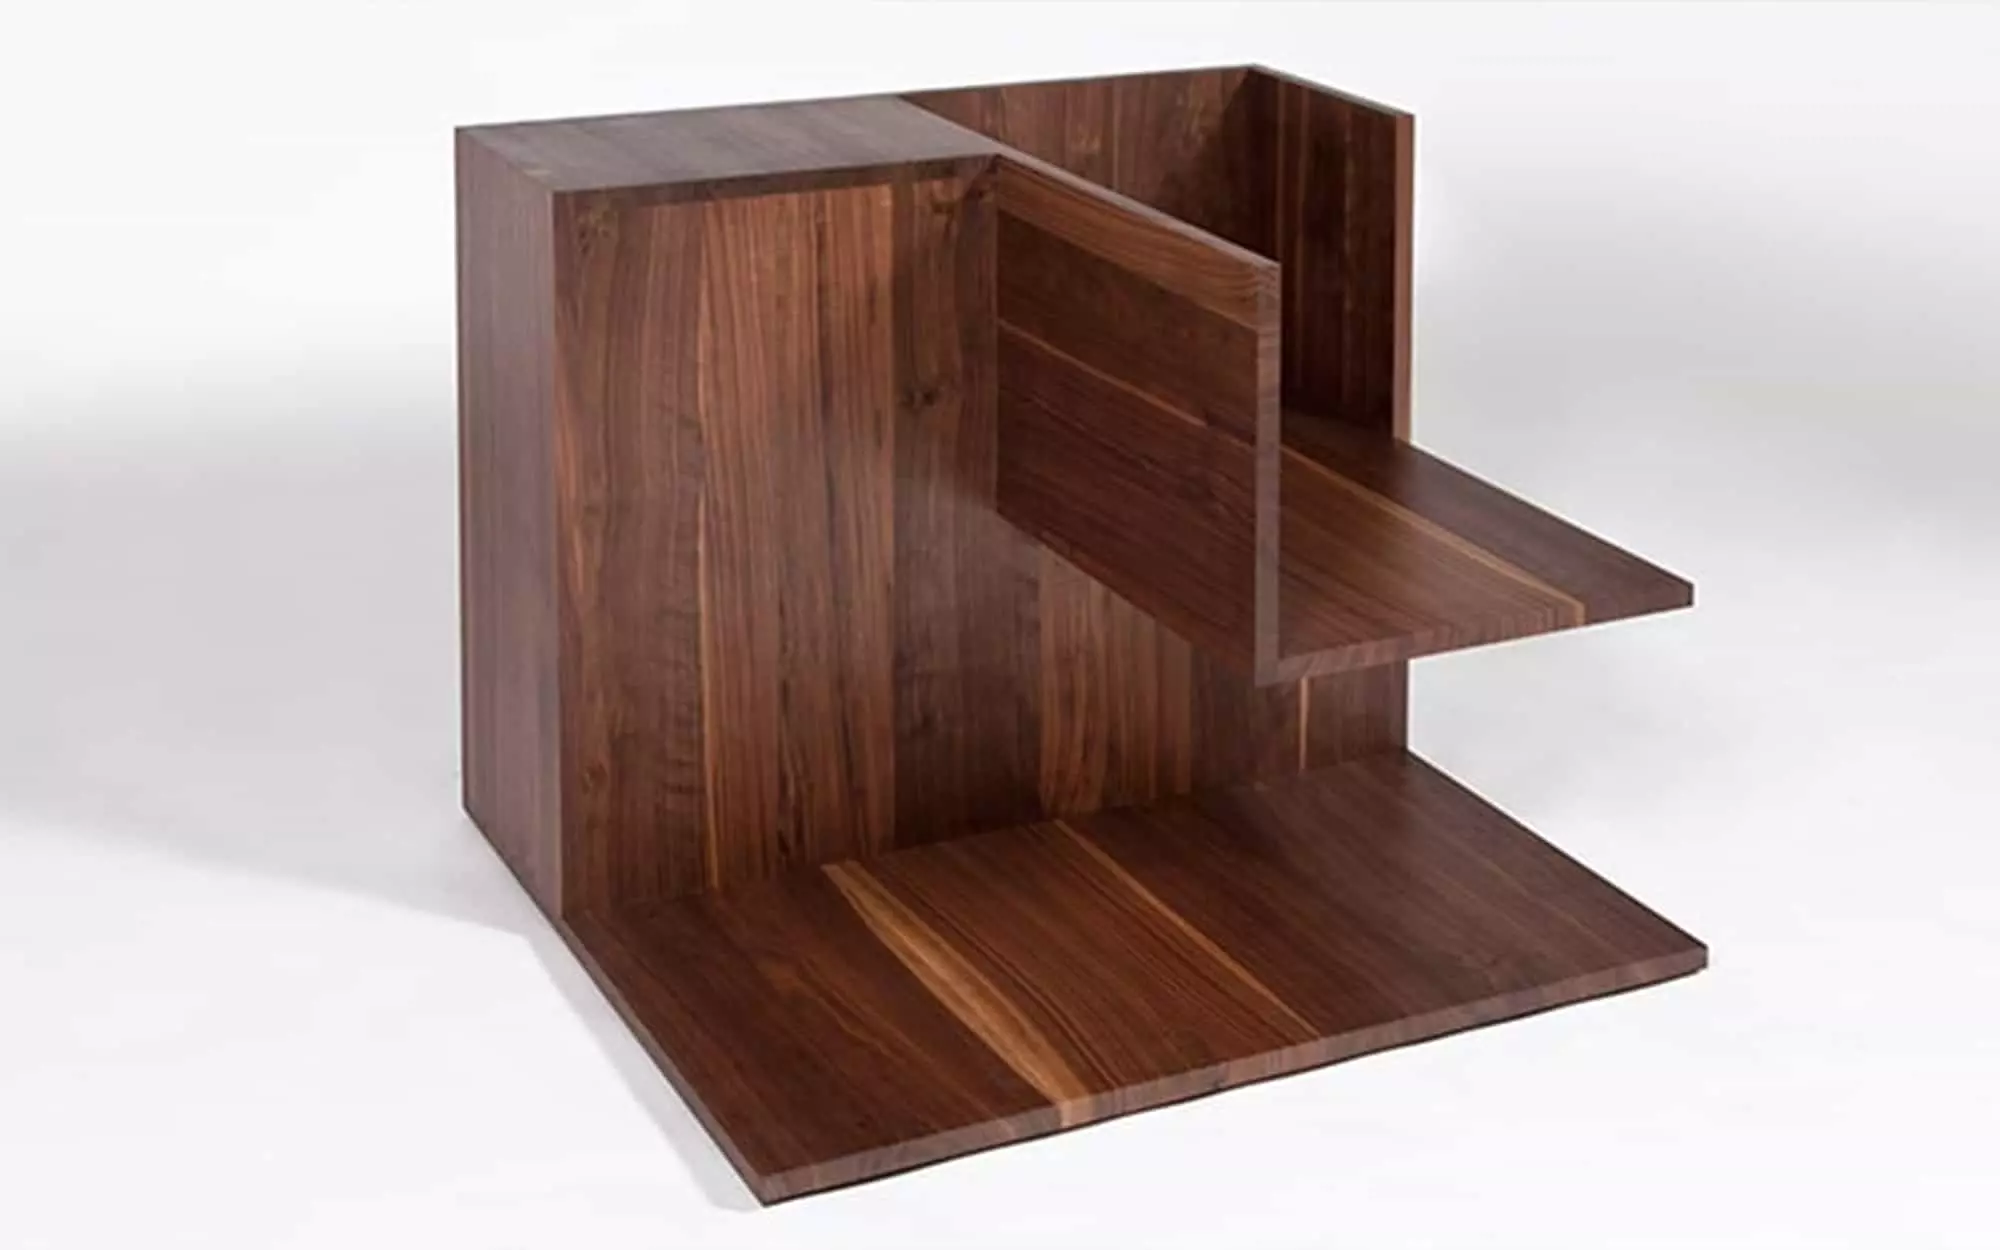 Hieronymus Wood - Konstantin Grcic - One piece a day.